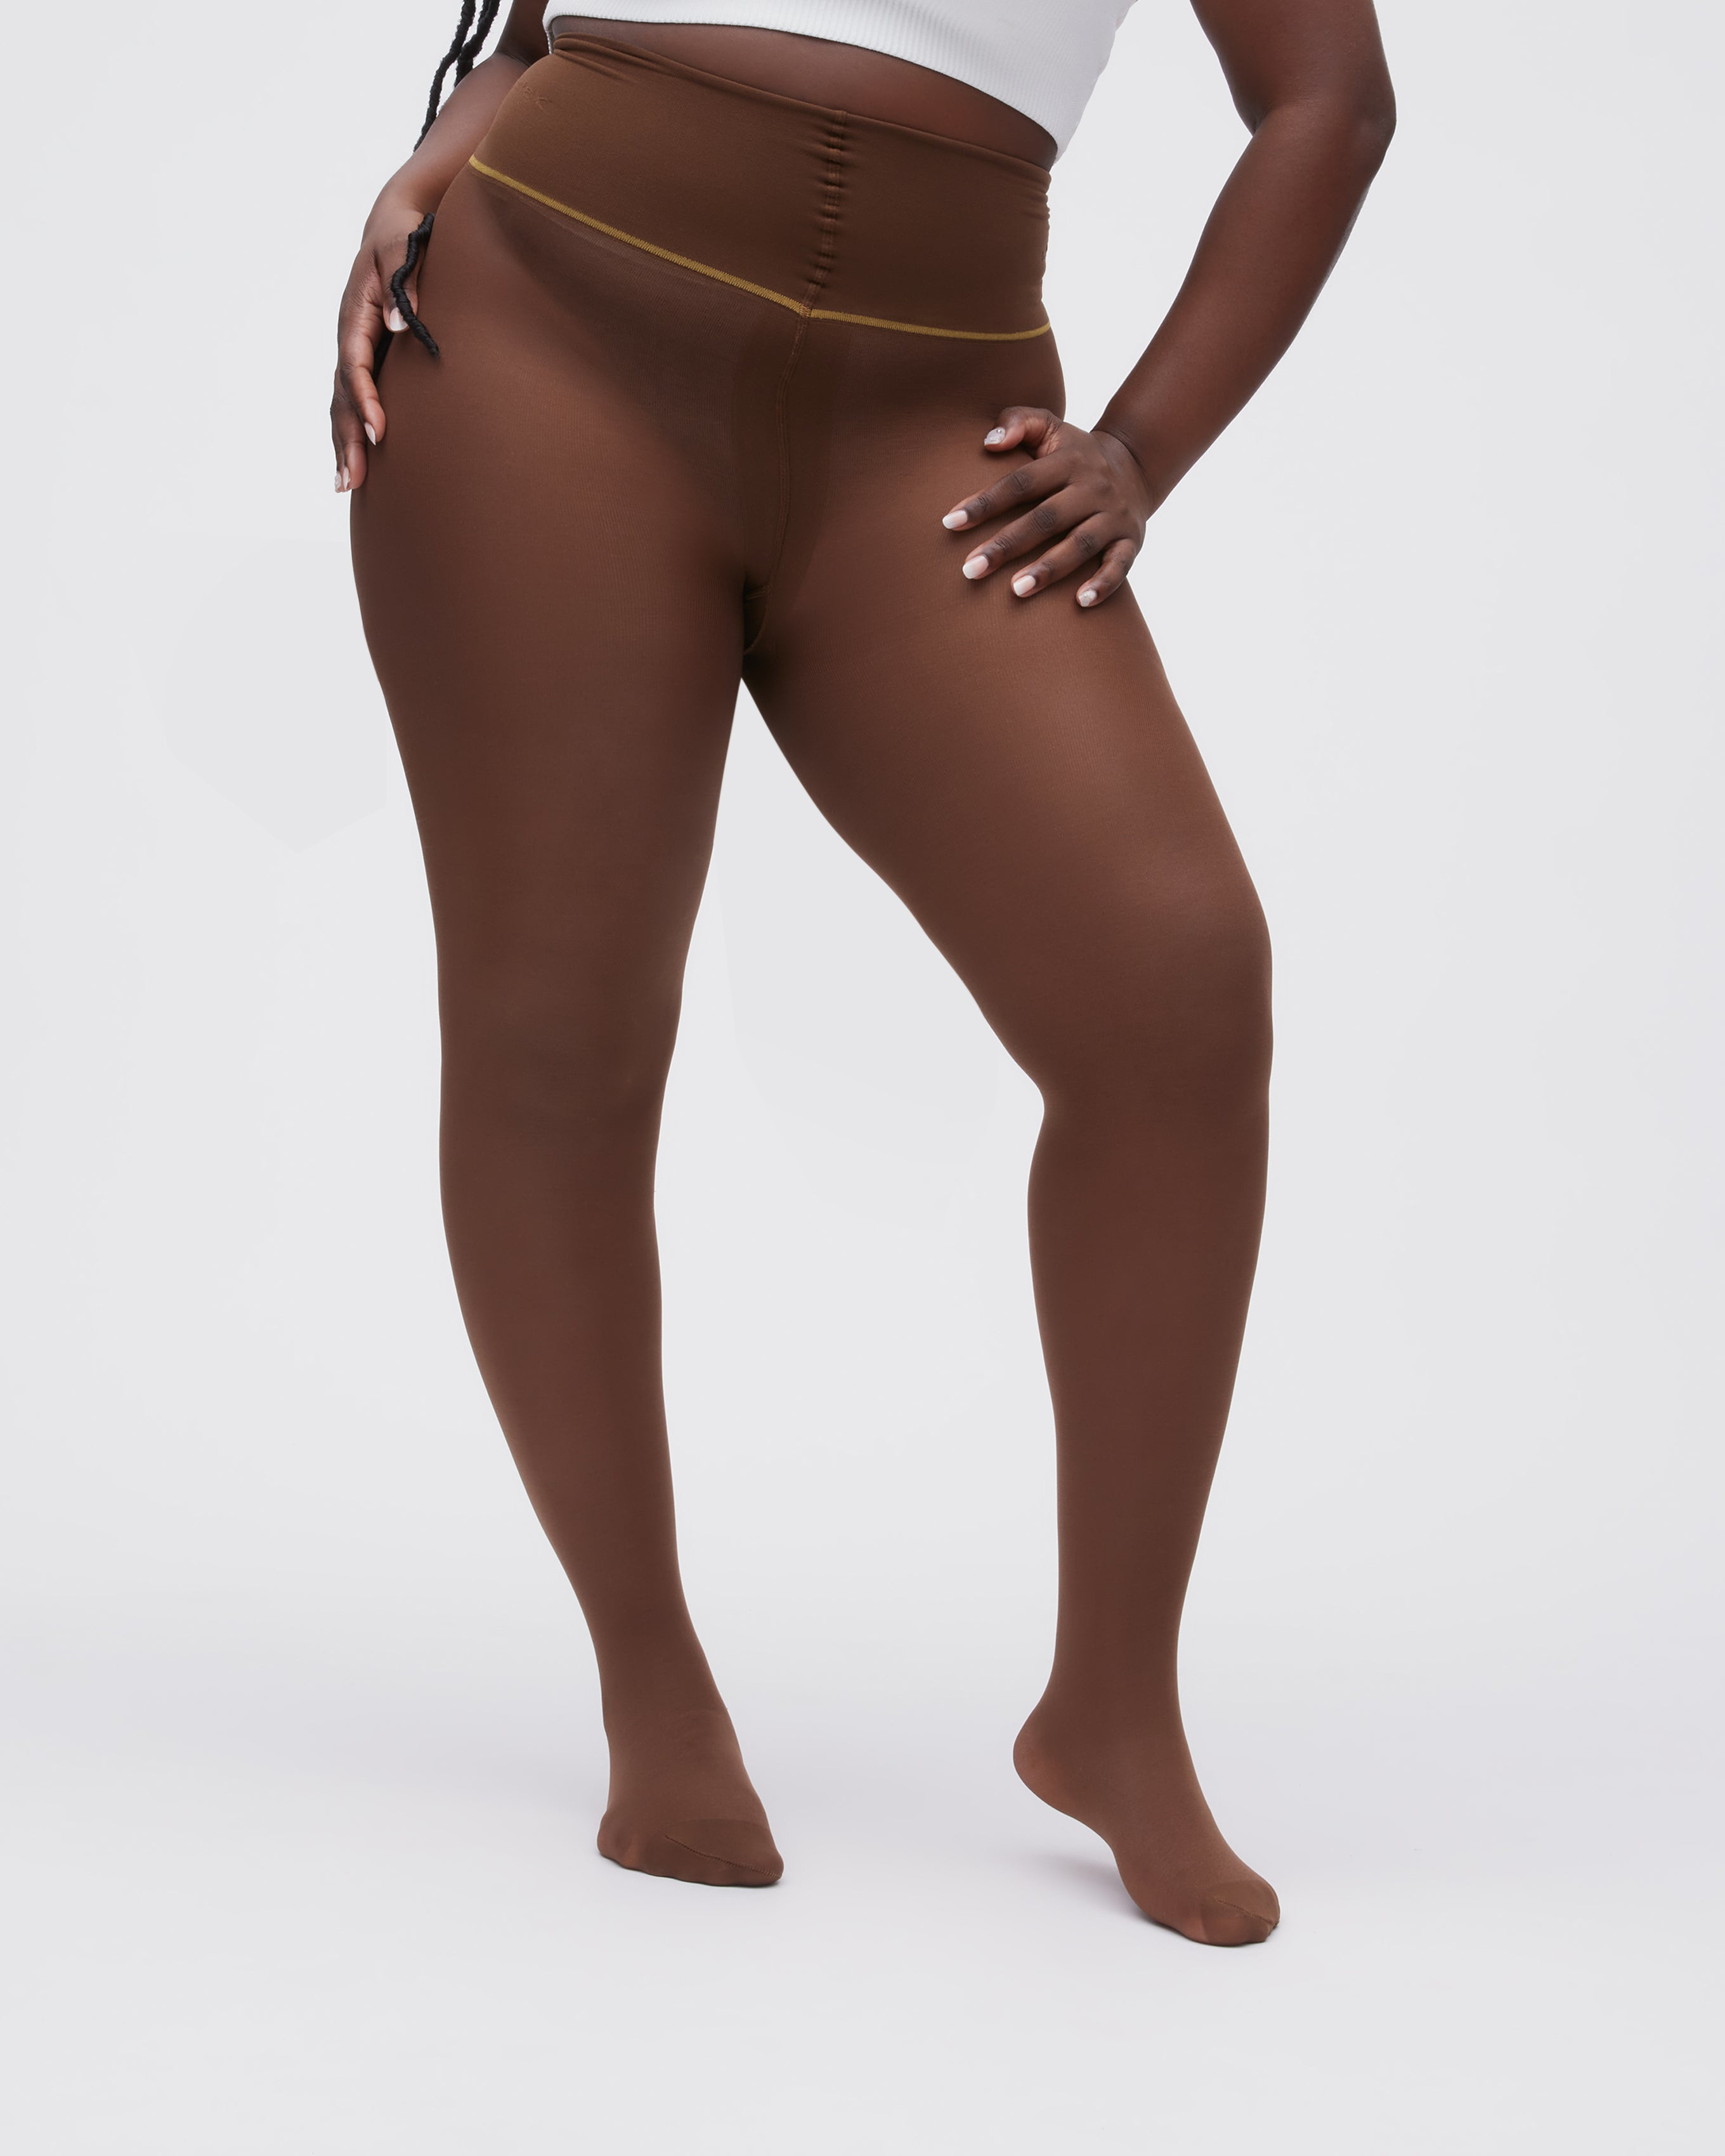 Thighs Disguise Nude - Medium